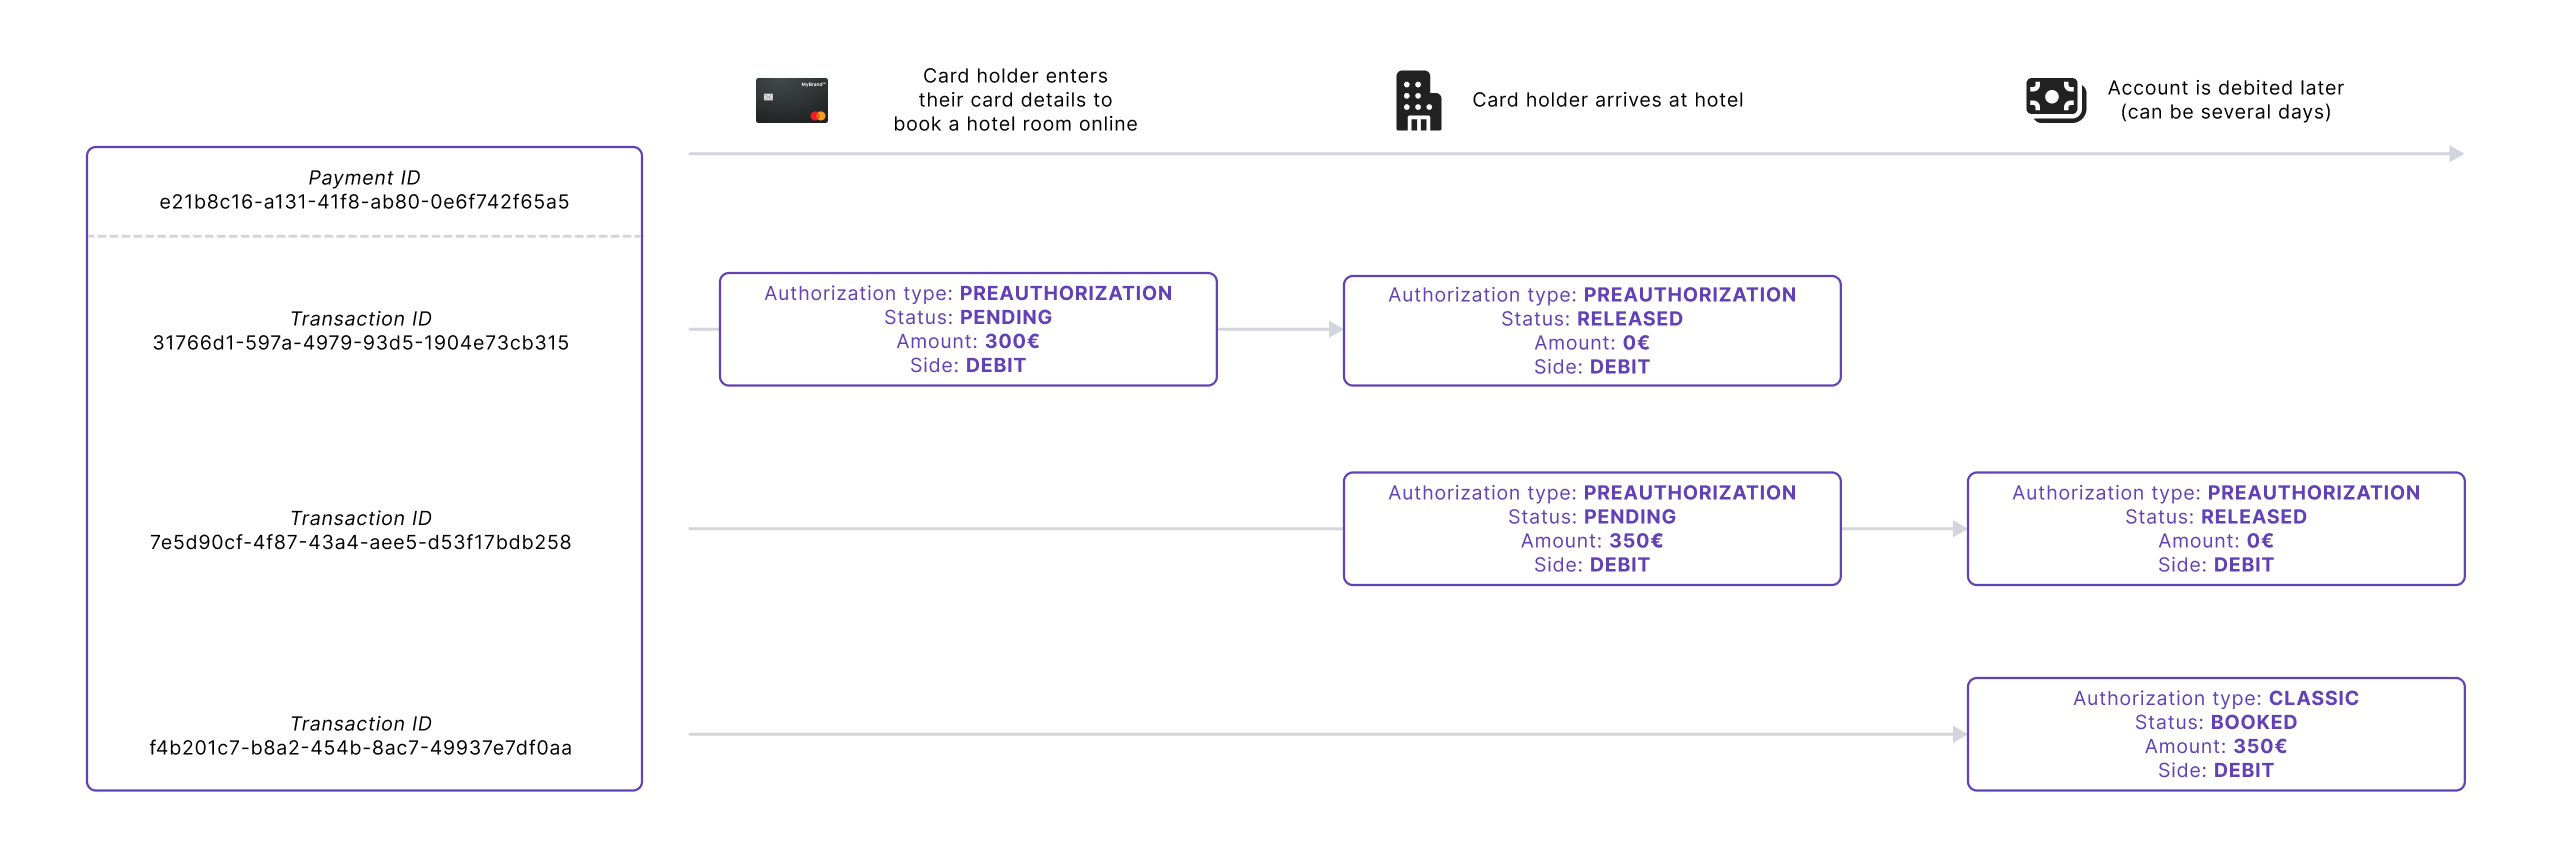 Multiple authorizations and debit example using booking a hotel